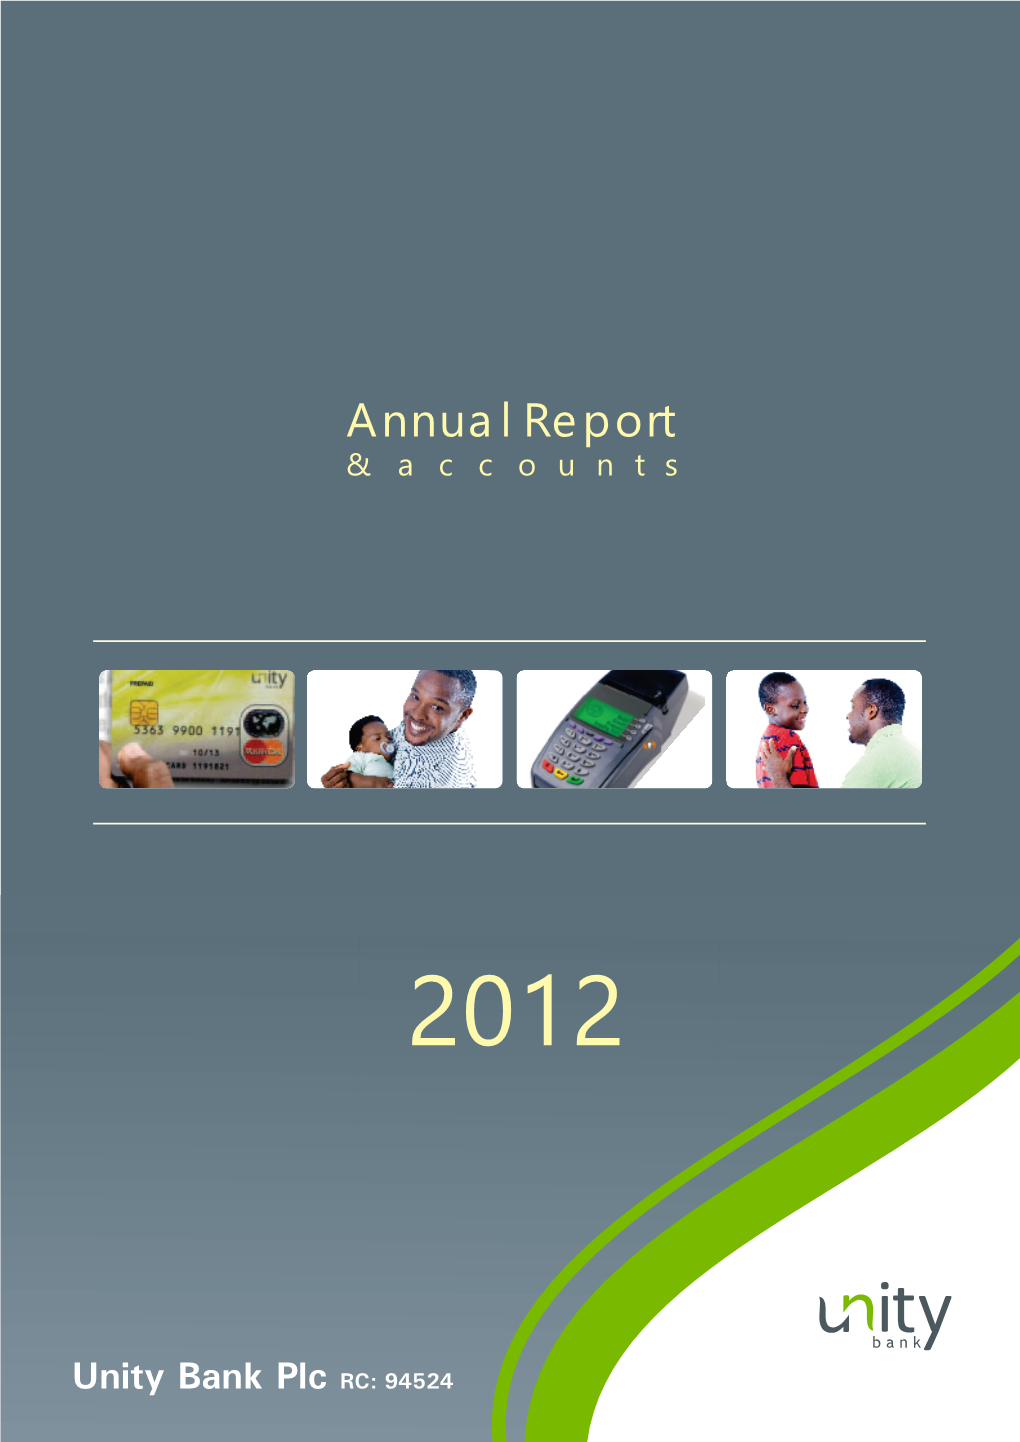 Unity Bank 2012 Annual Report